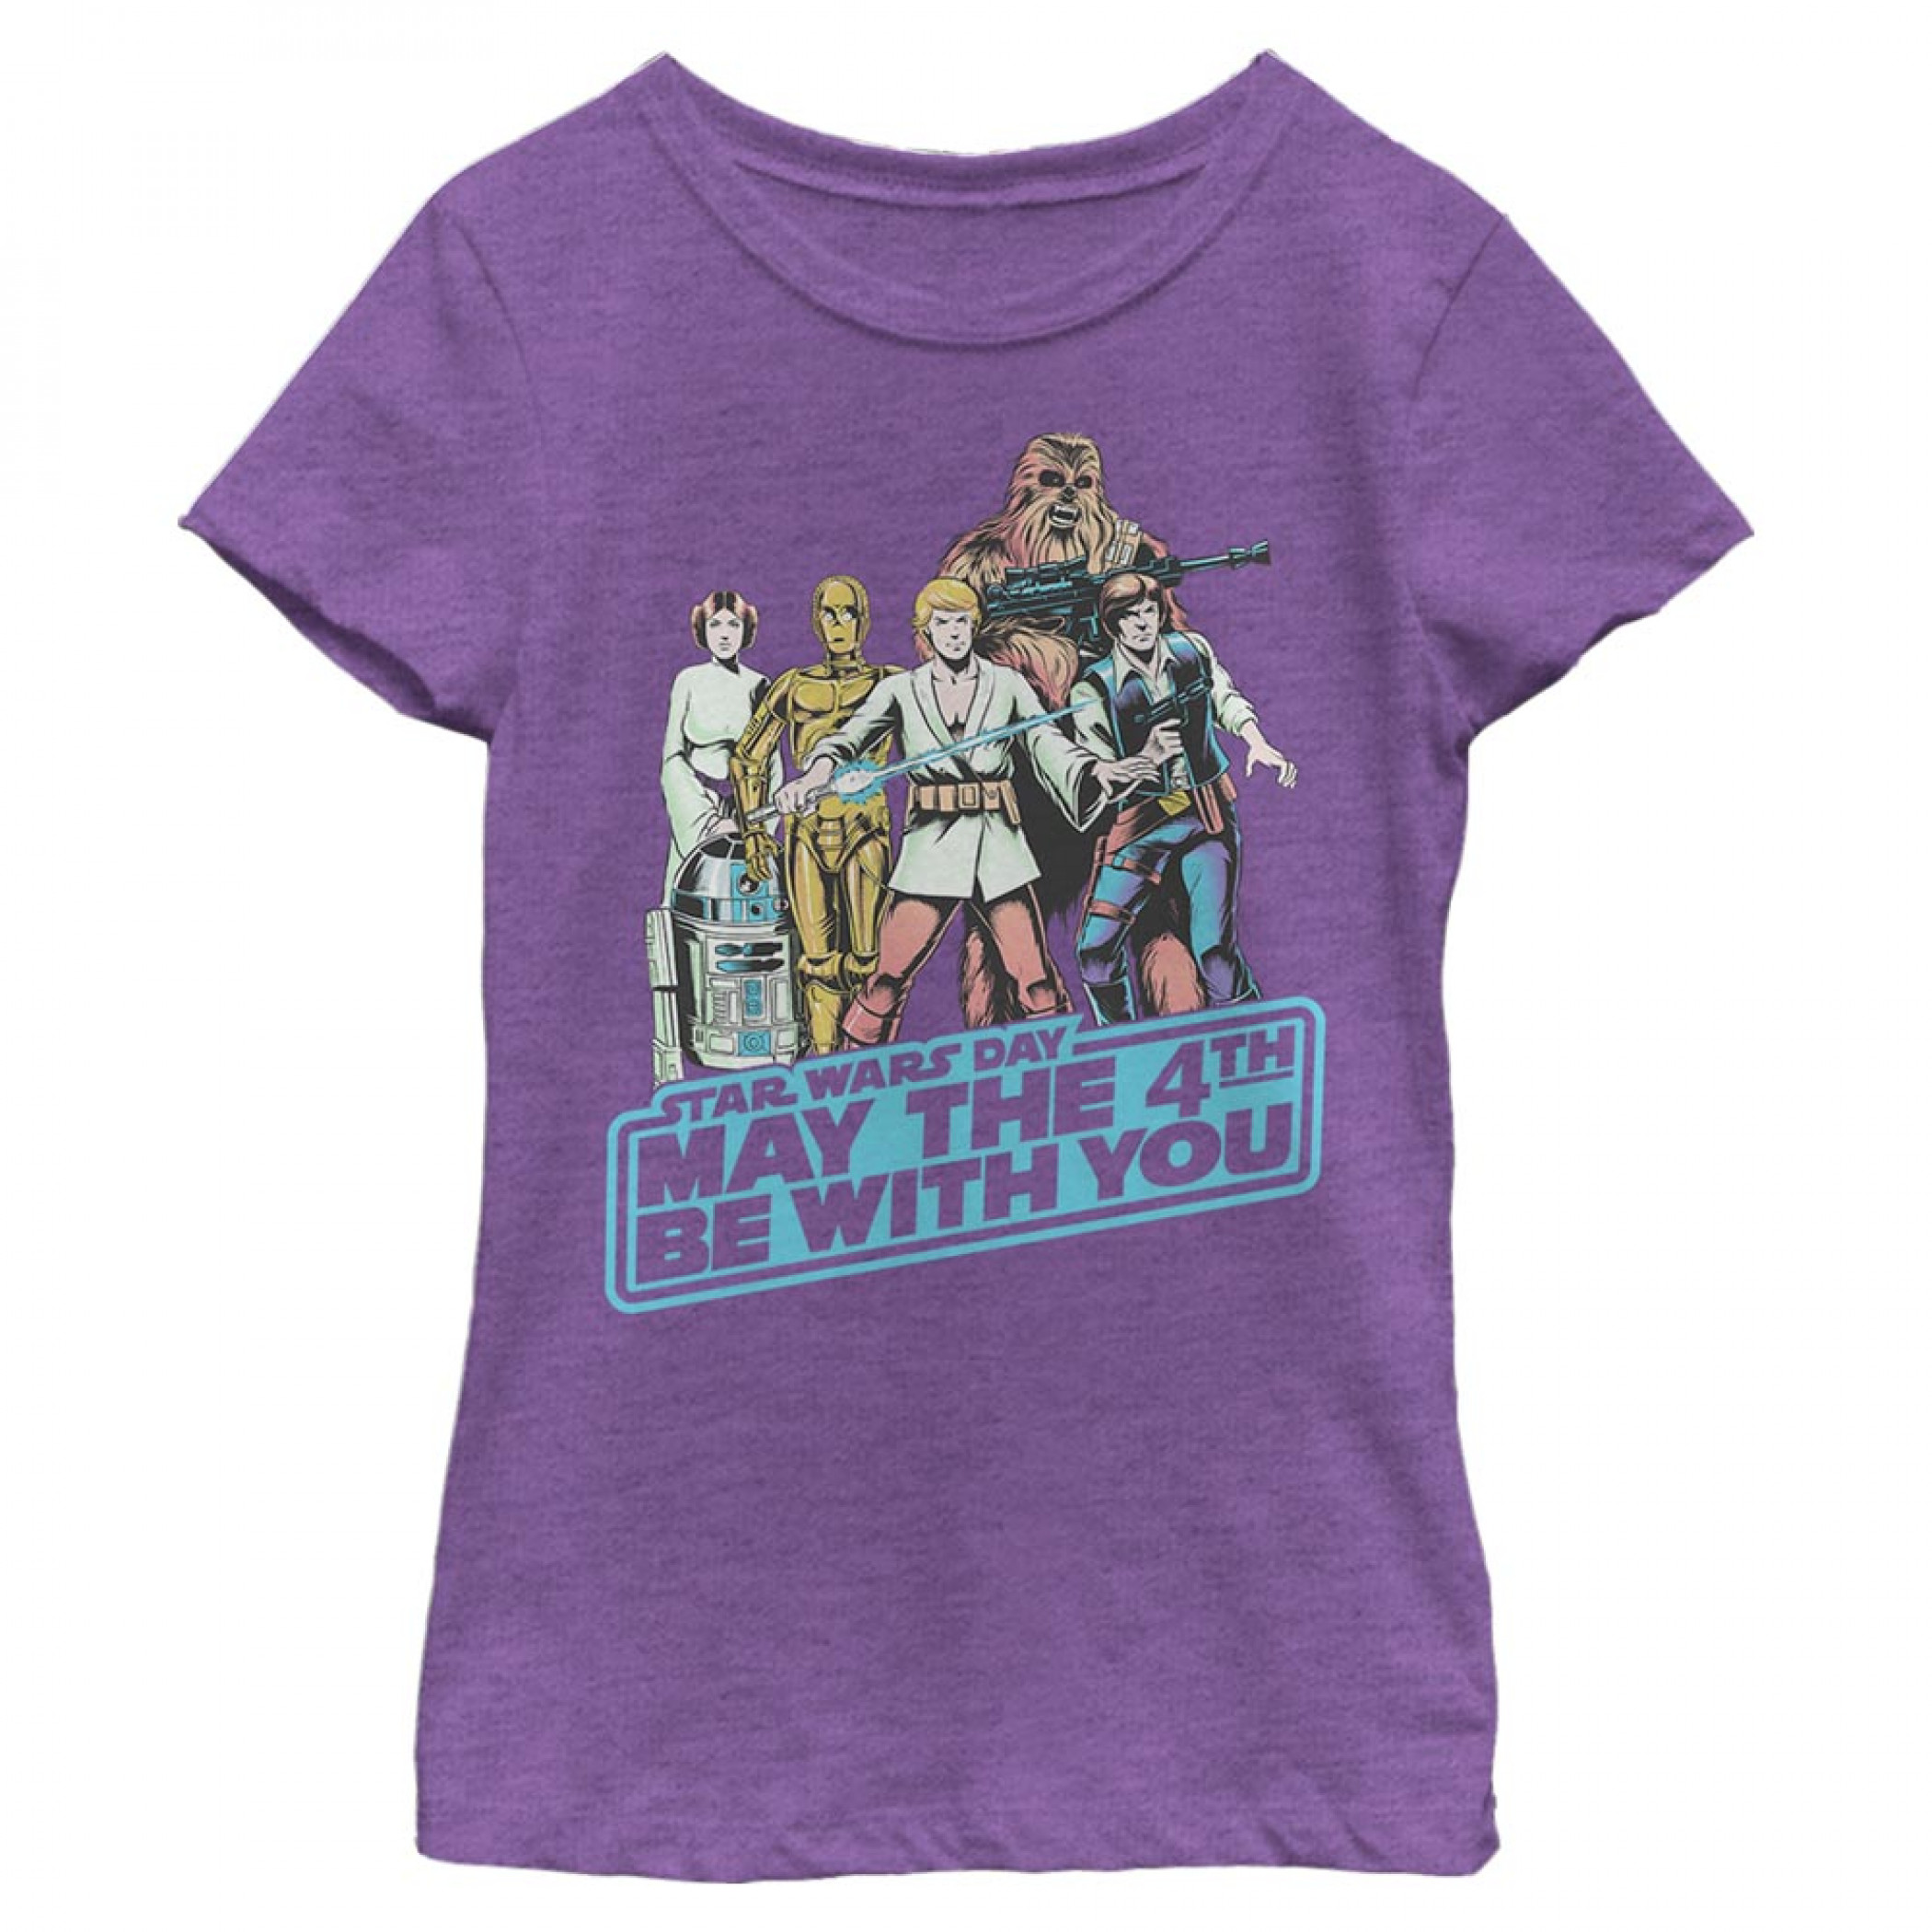 Star Wars May the 4th Be With You Rebels Girl's T-Shirt